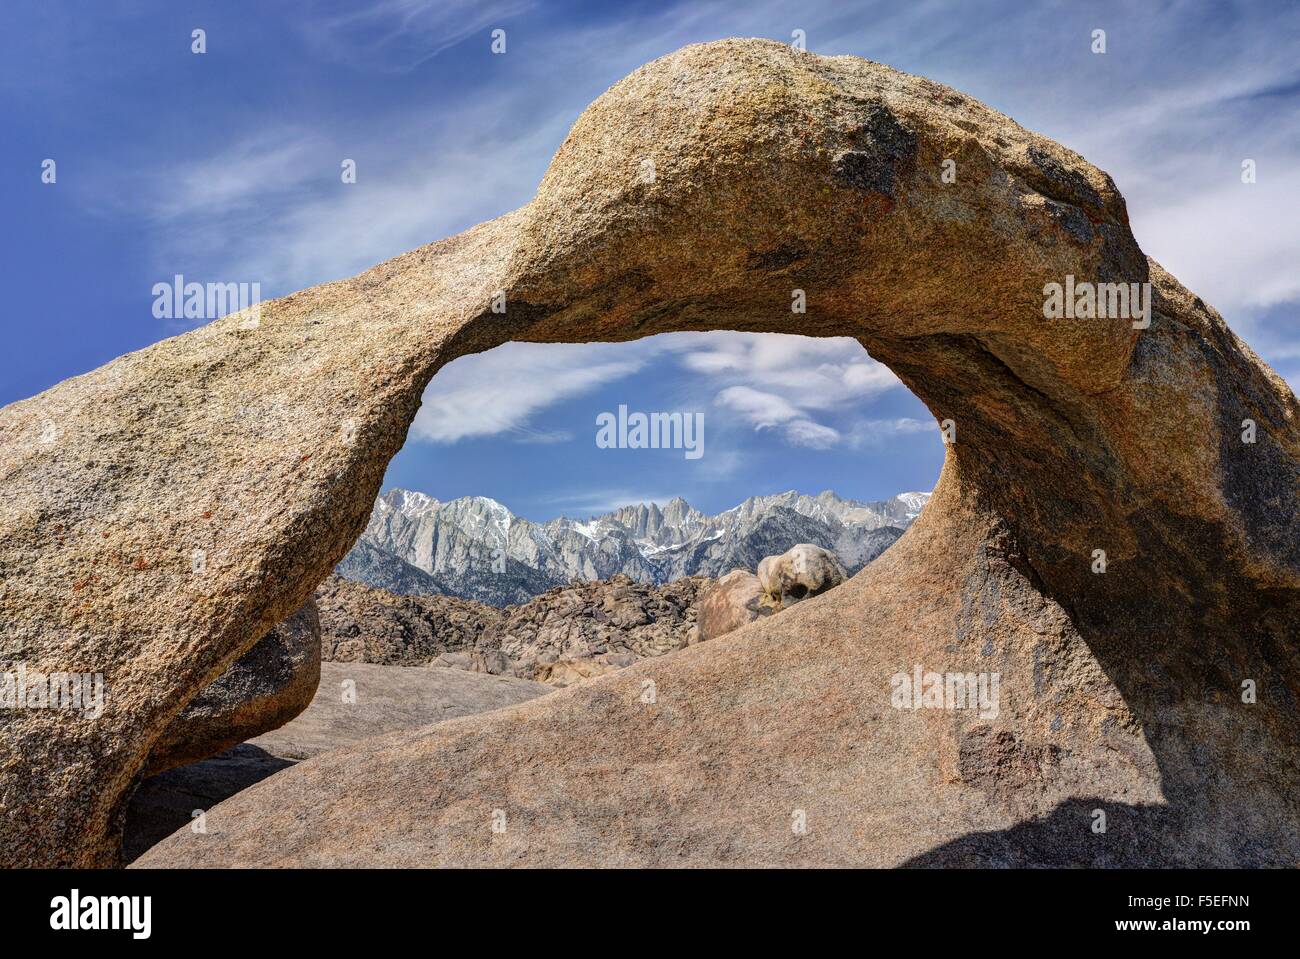 Mount whitney seen from mobius arch, Alabama Hills, California, USA Stock Photo